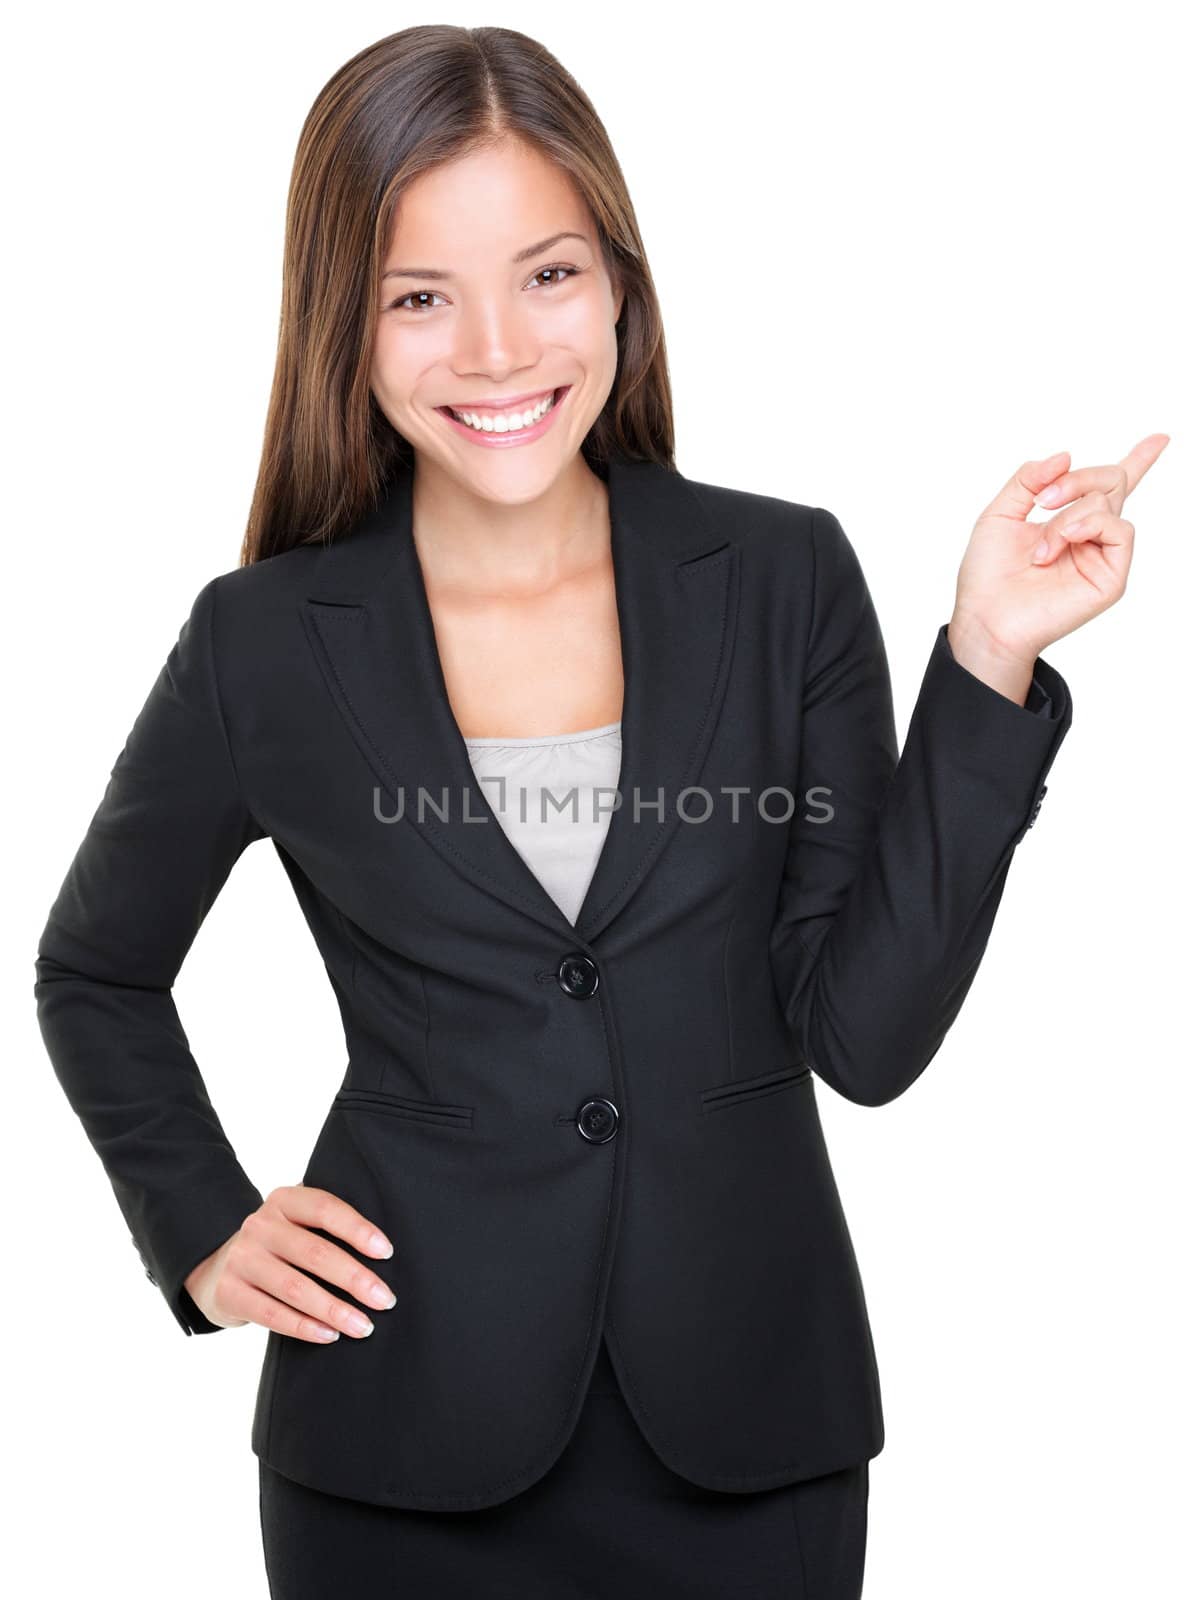 Businesswoman in suit pointing smiling. Isolated on white background. Asian Caucasian female model.